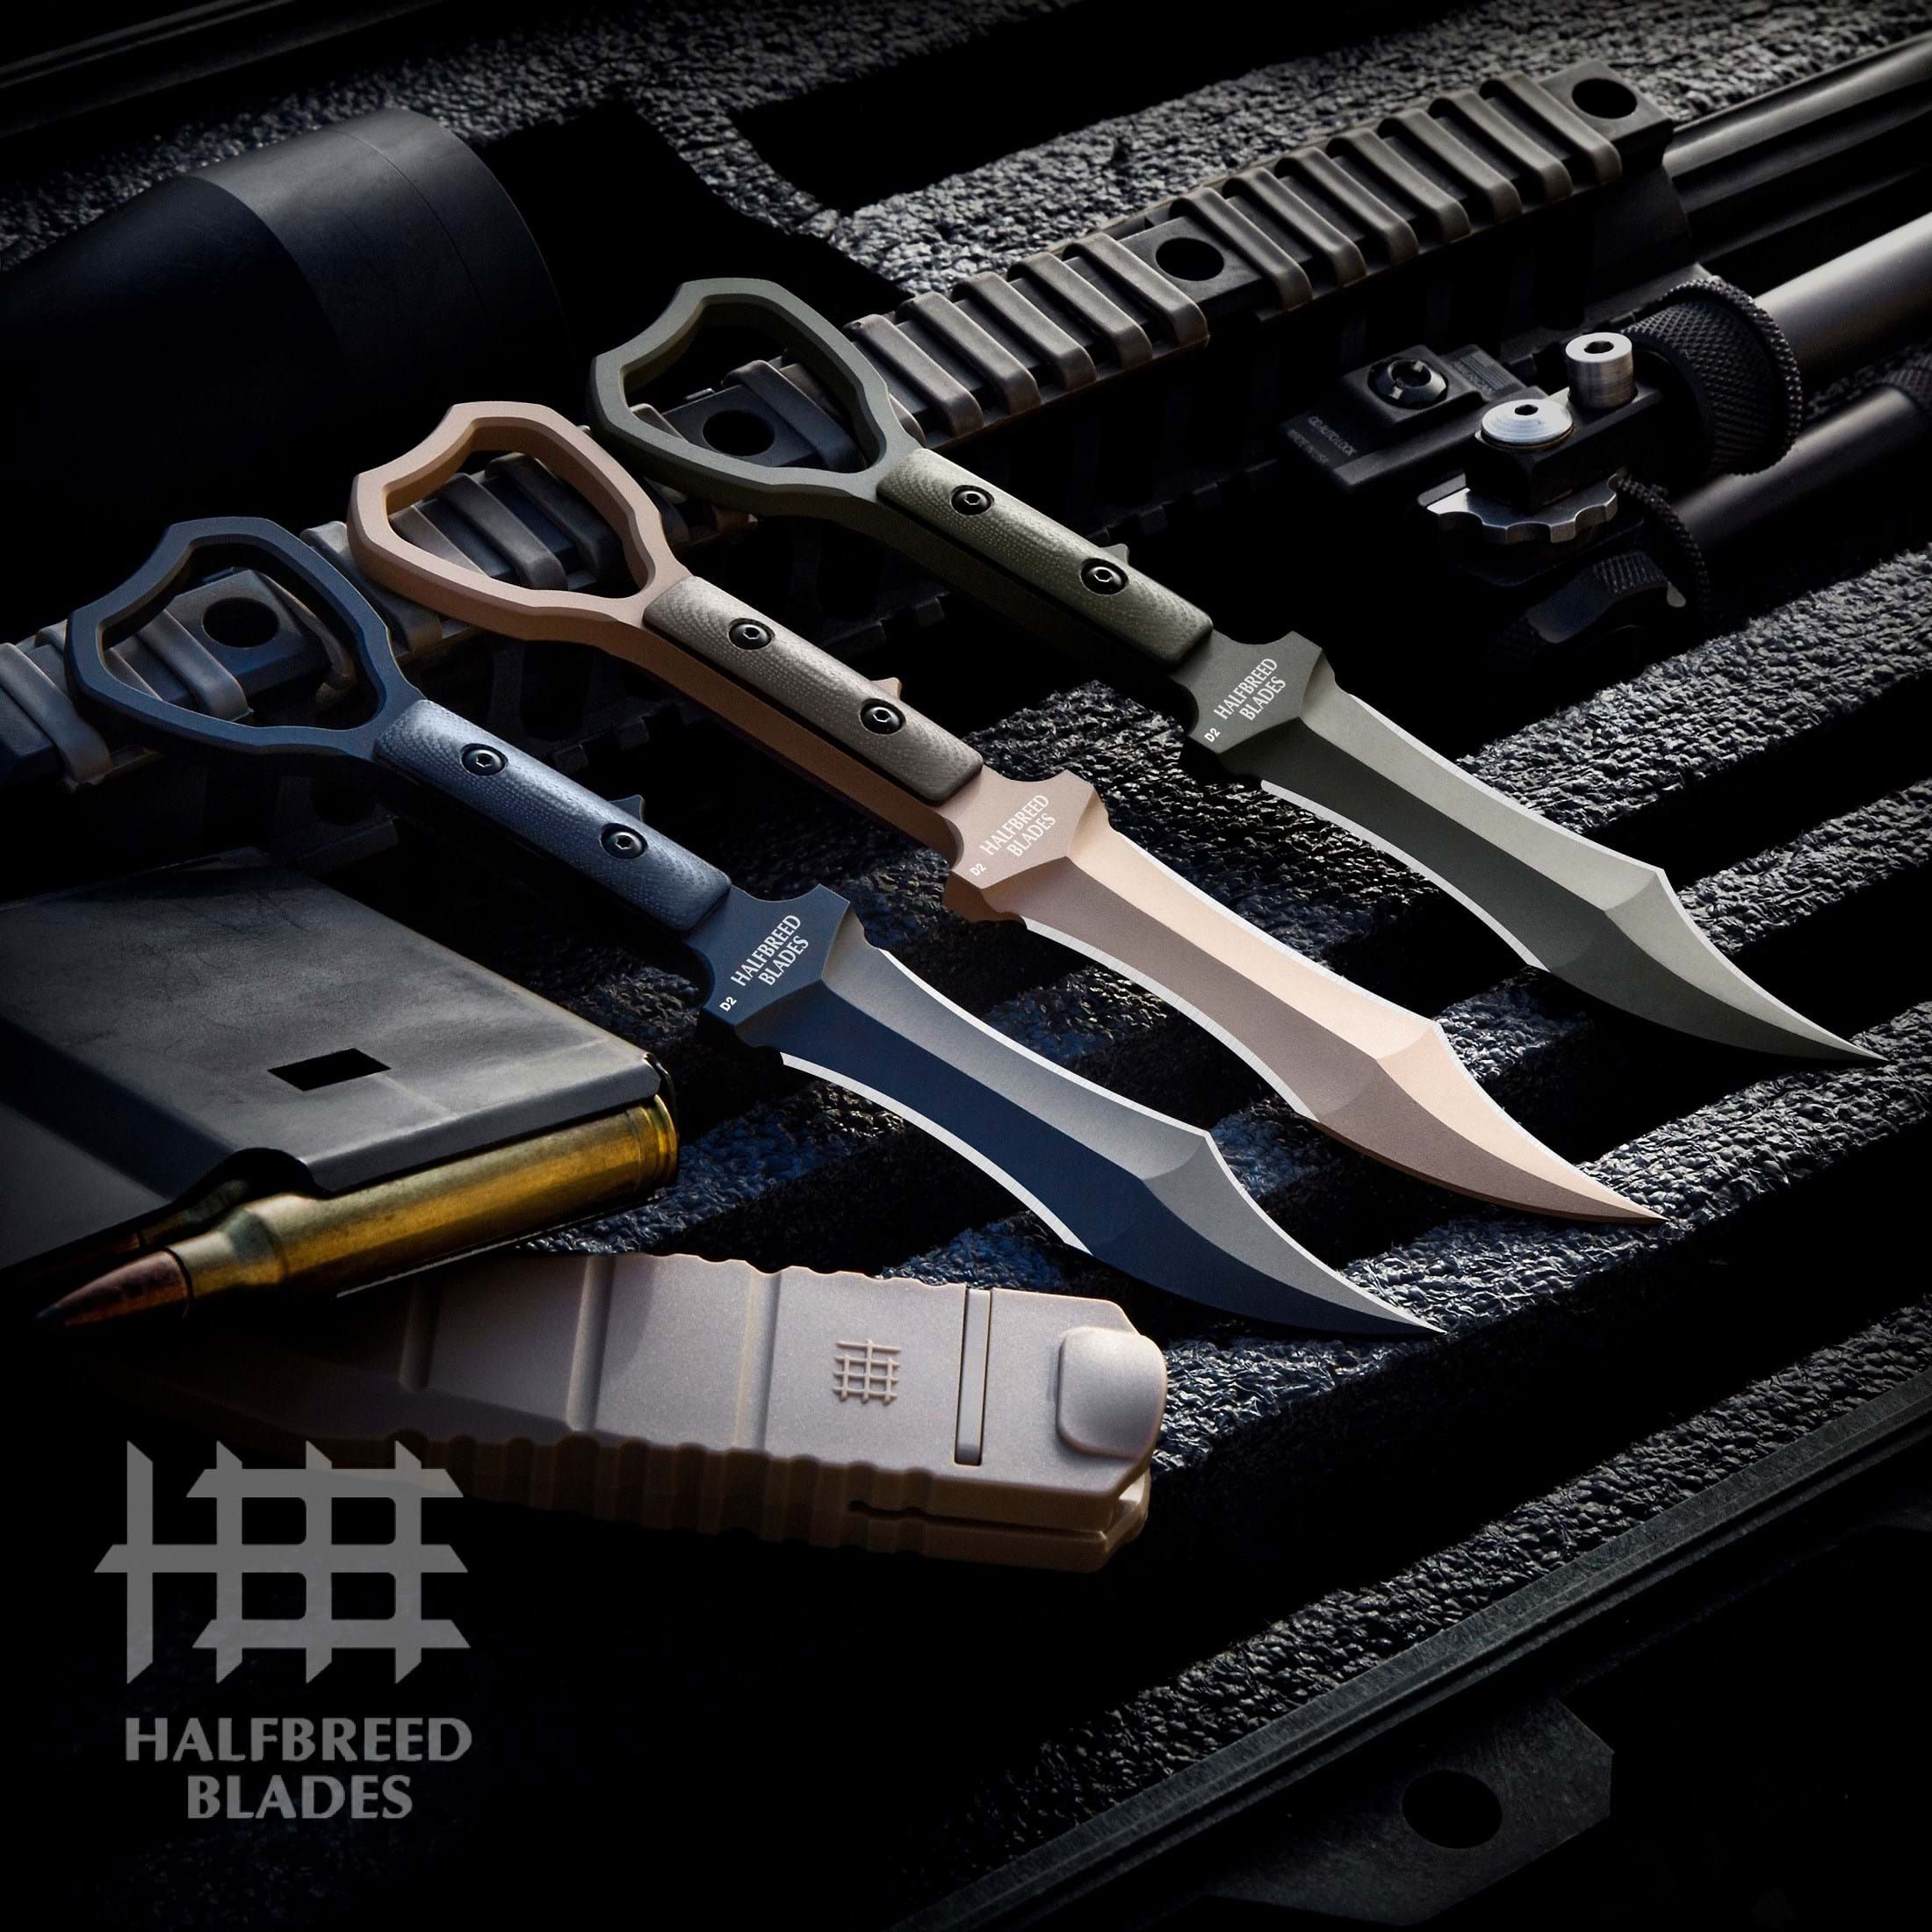 Halfbreed Blades Compact Clearance Fixed Blade Knife and Trainer Set 3.94  D2 Dark Earth Teflon Tanto Blade, G10 Handles, Injection Molded Sheath -  KnifeCenter - CCK-02 BUNDLE